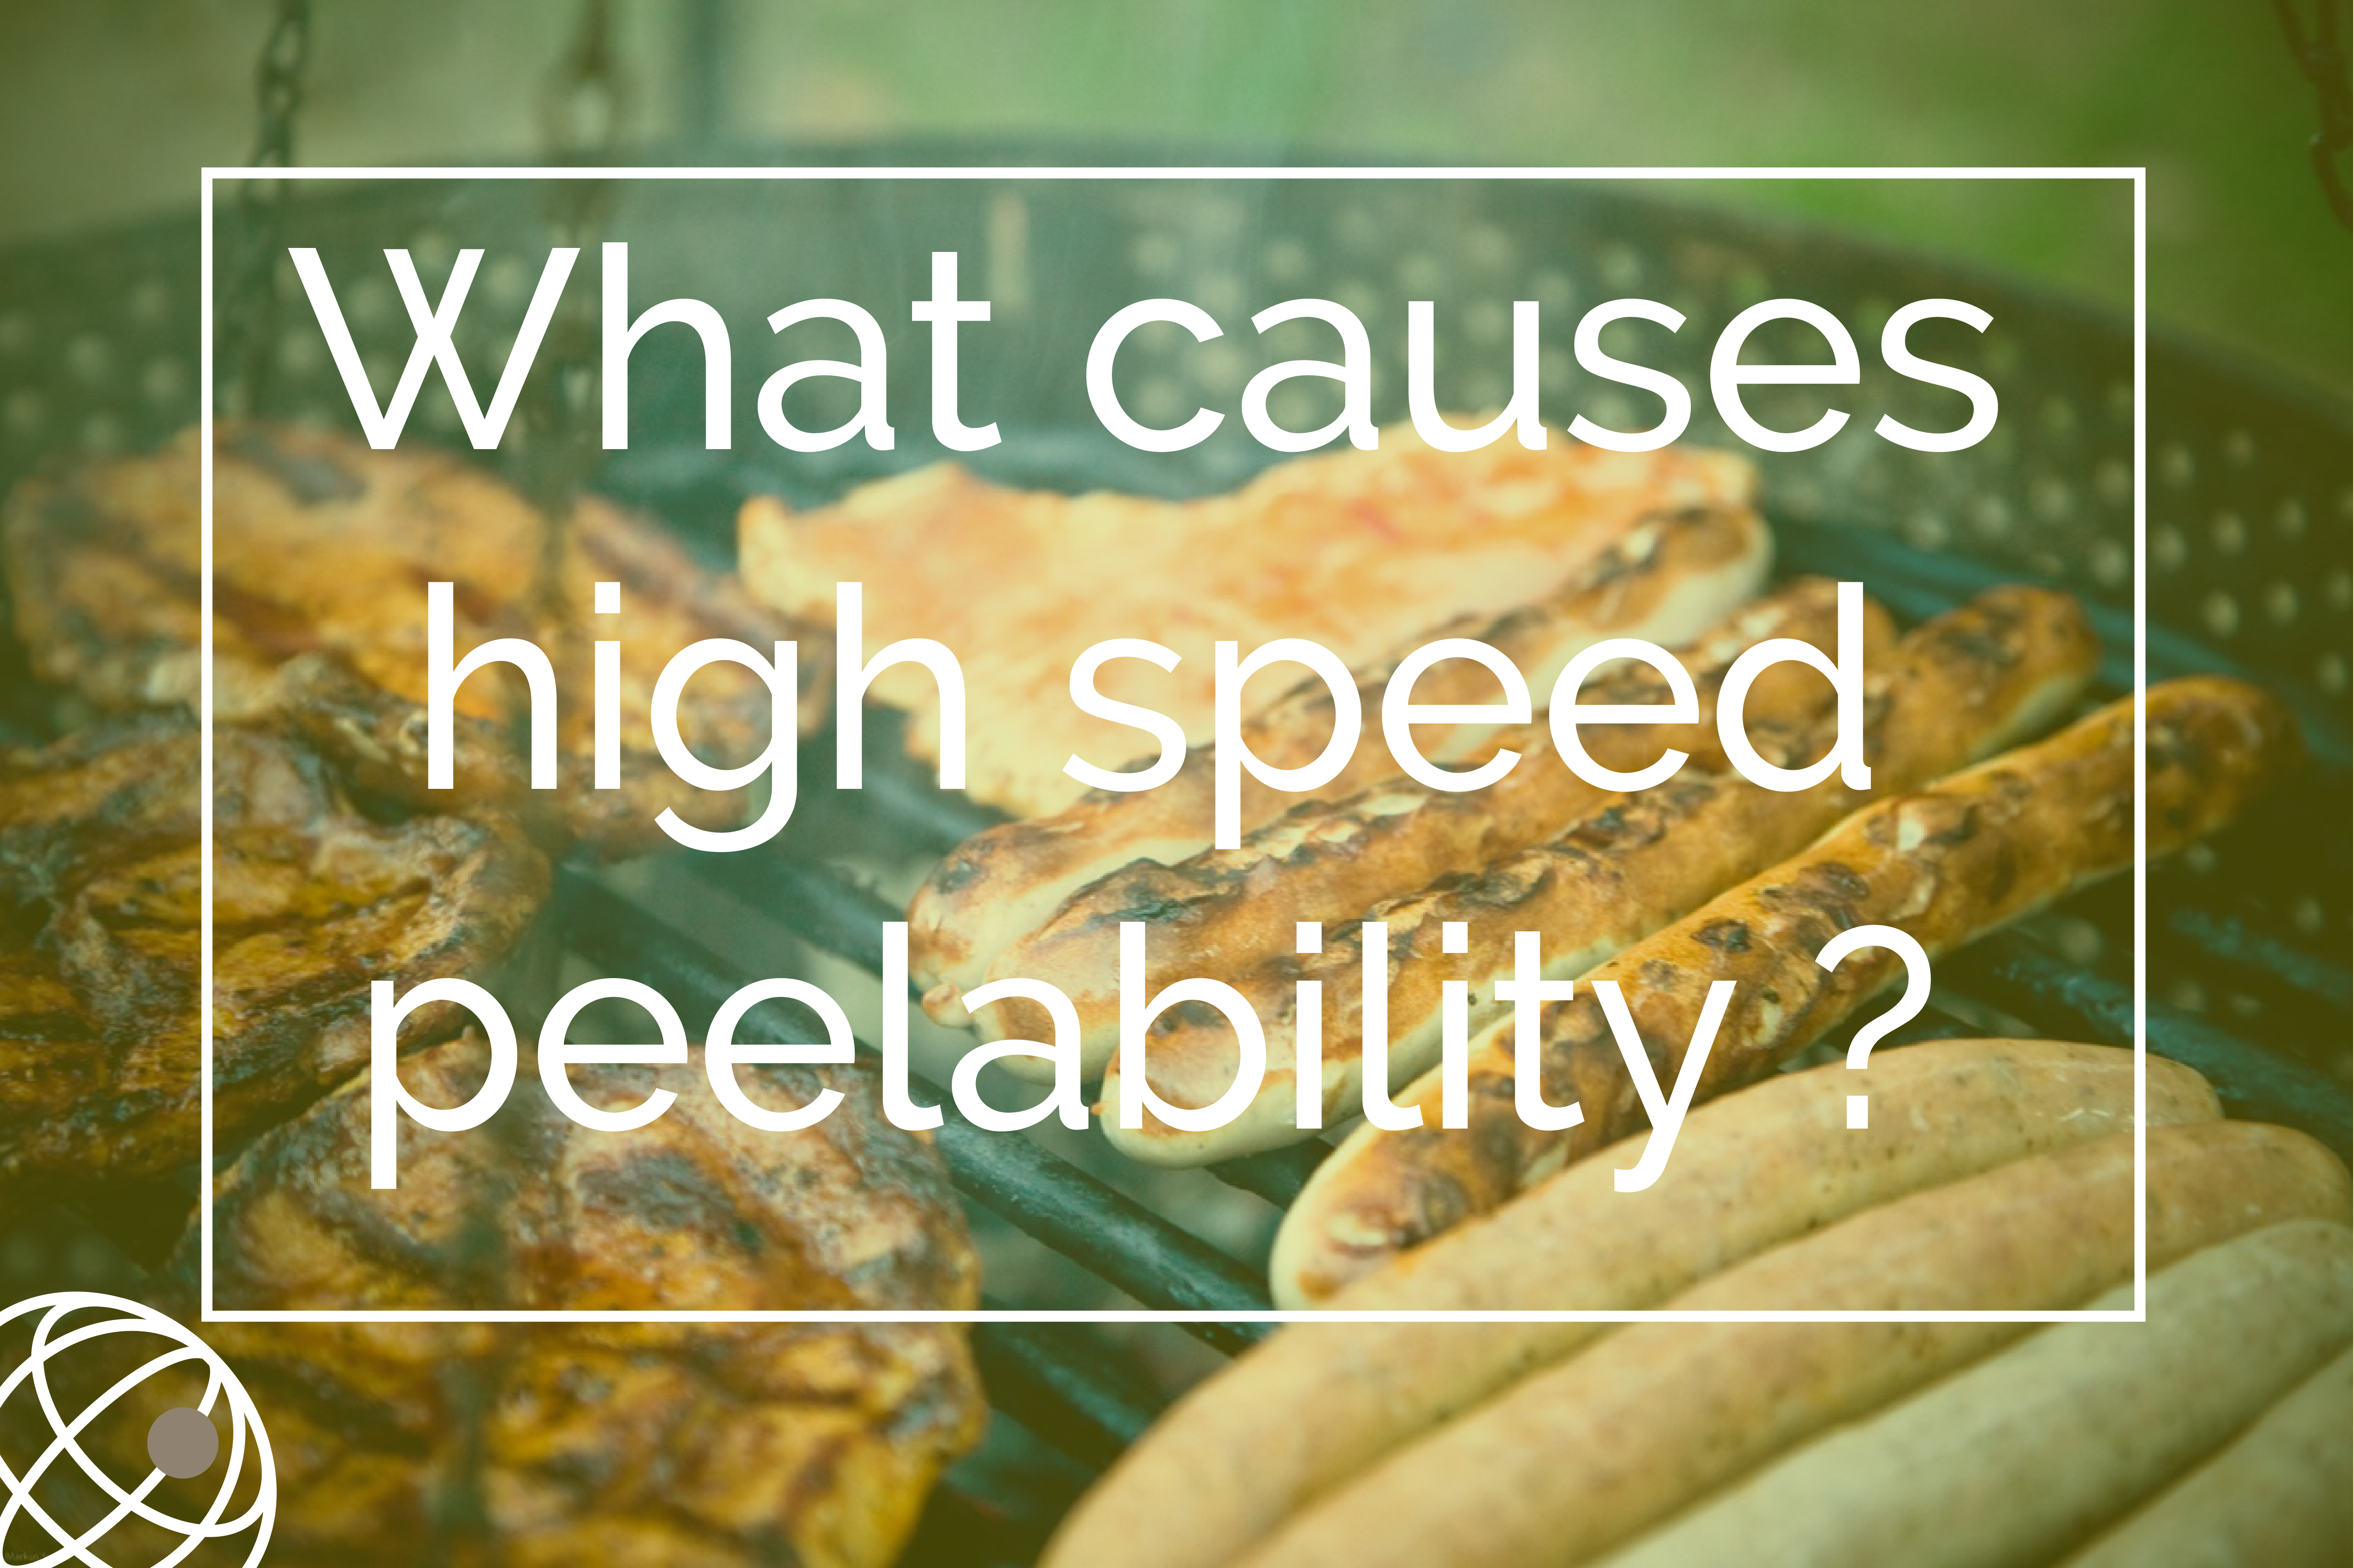 What causes high speed peelability ?